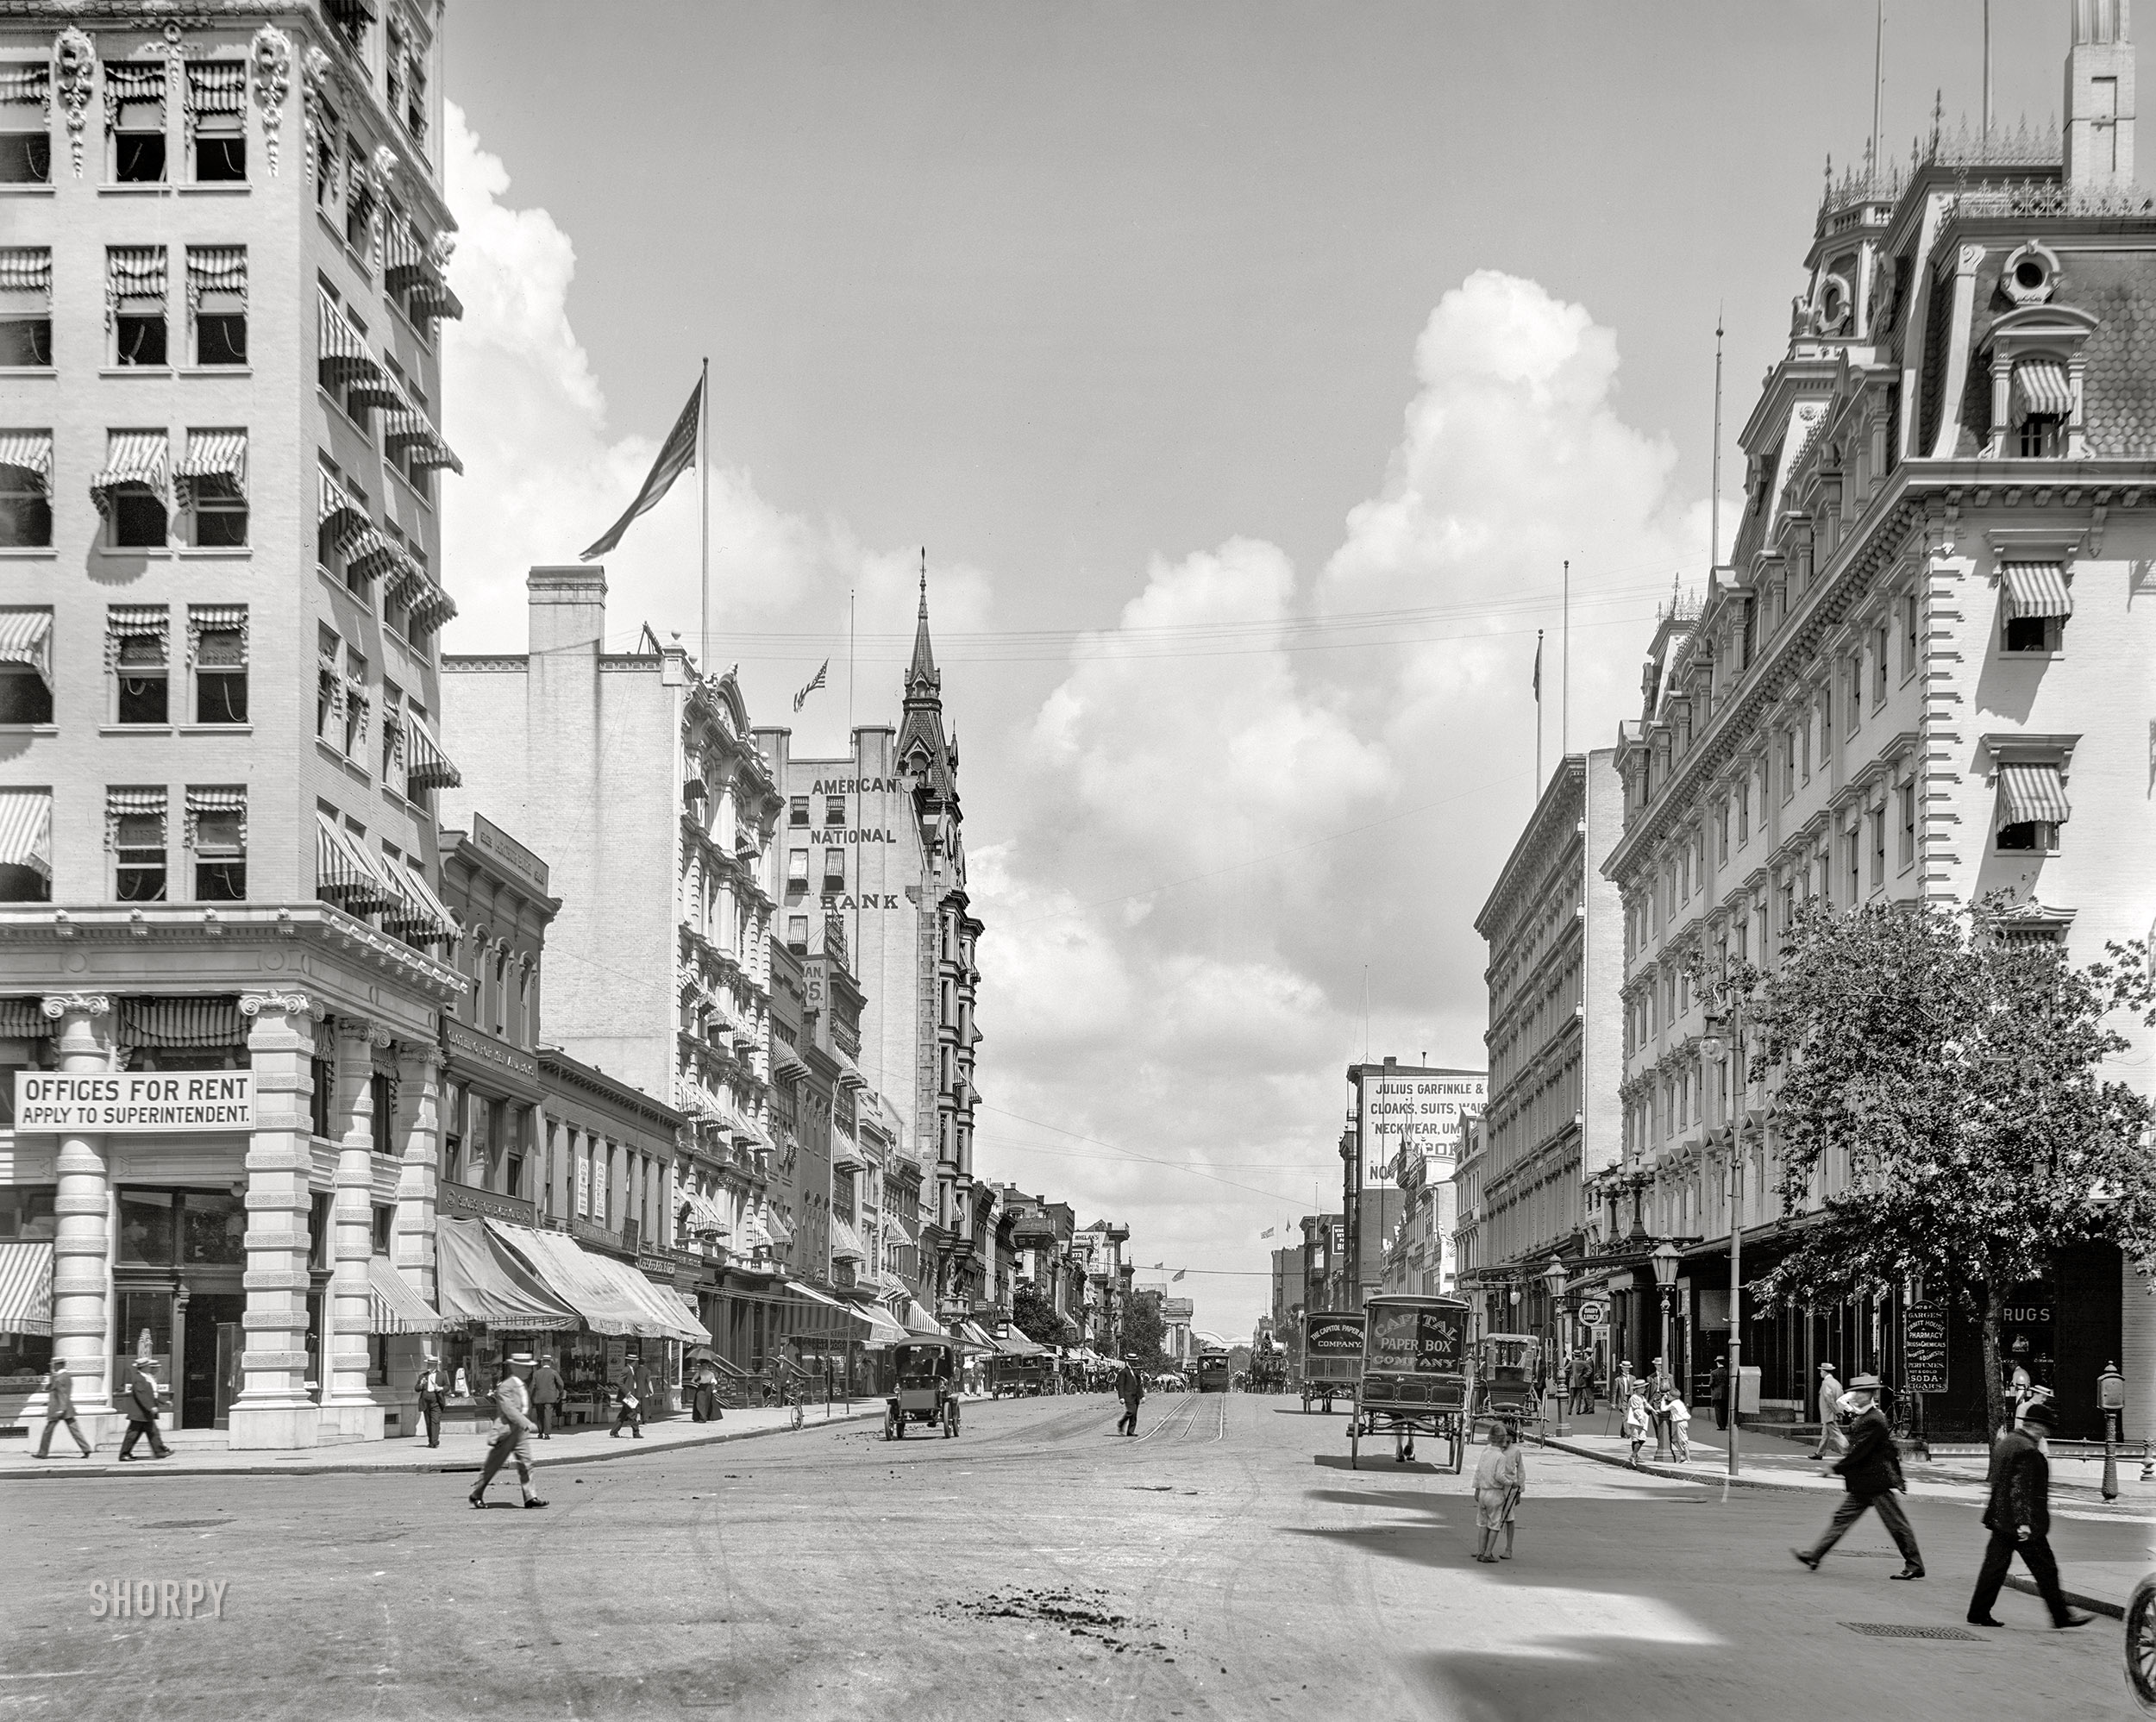 Washington, D.C., circa 1908. "F Street N.W. from Treasury Dept." At right, the Ebbitt House hotel at F and 14th. 8x10 inch glass negative, Detroit Publishing Company. View full size.